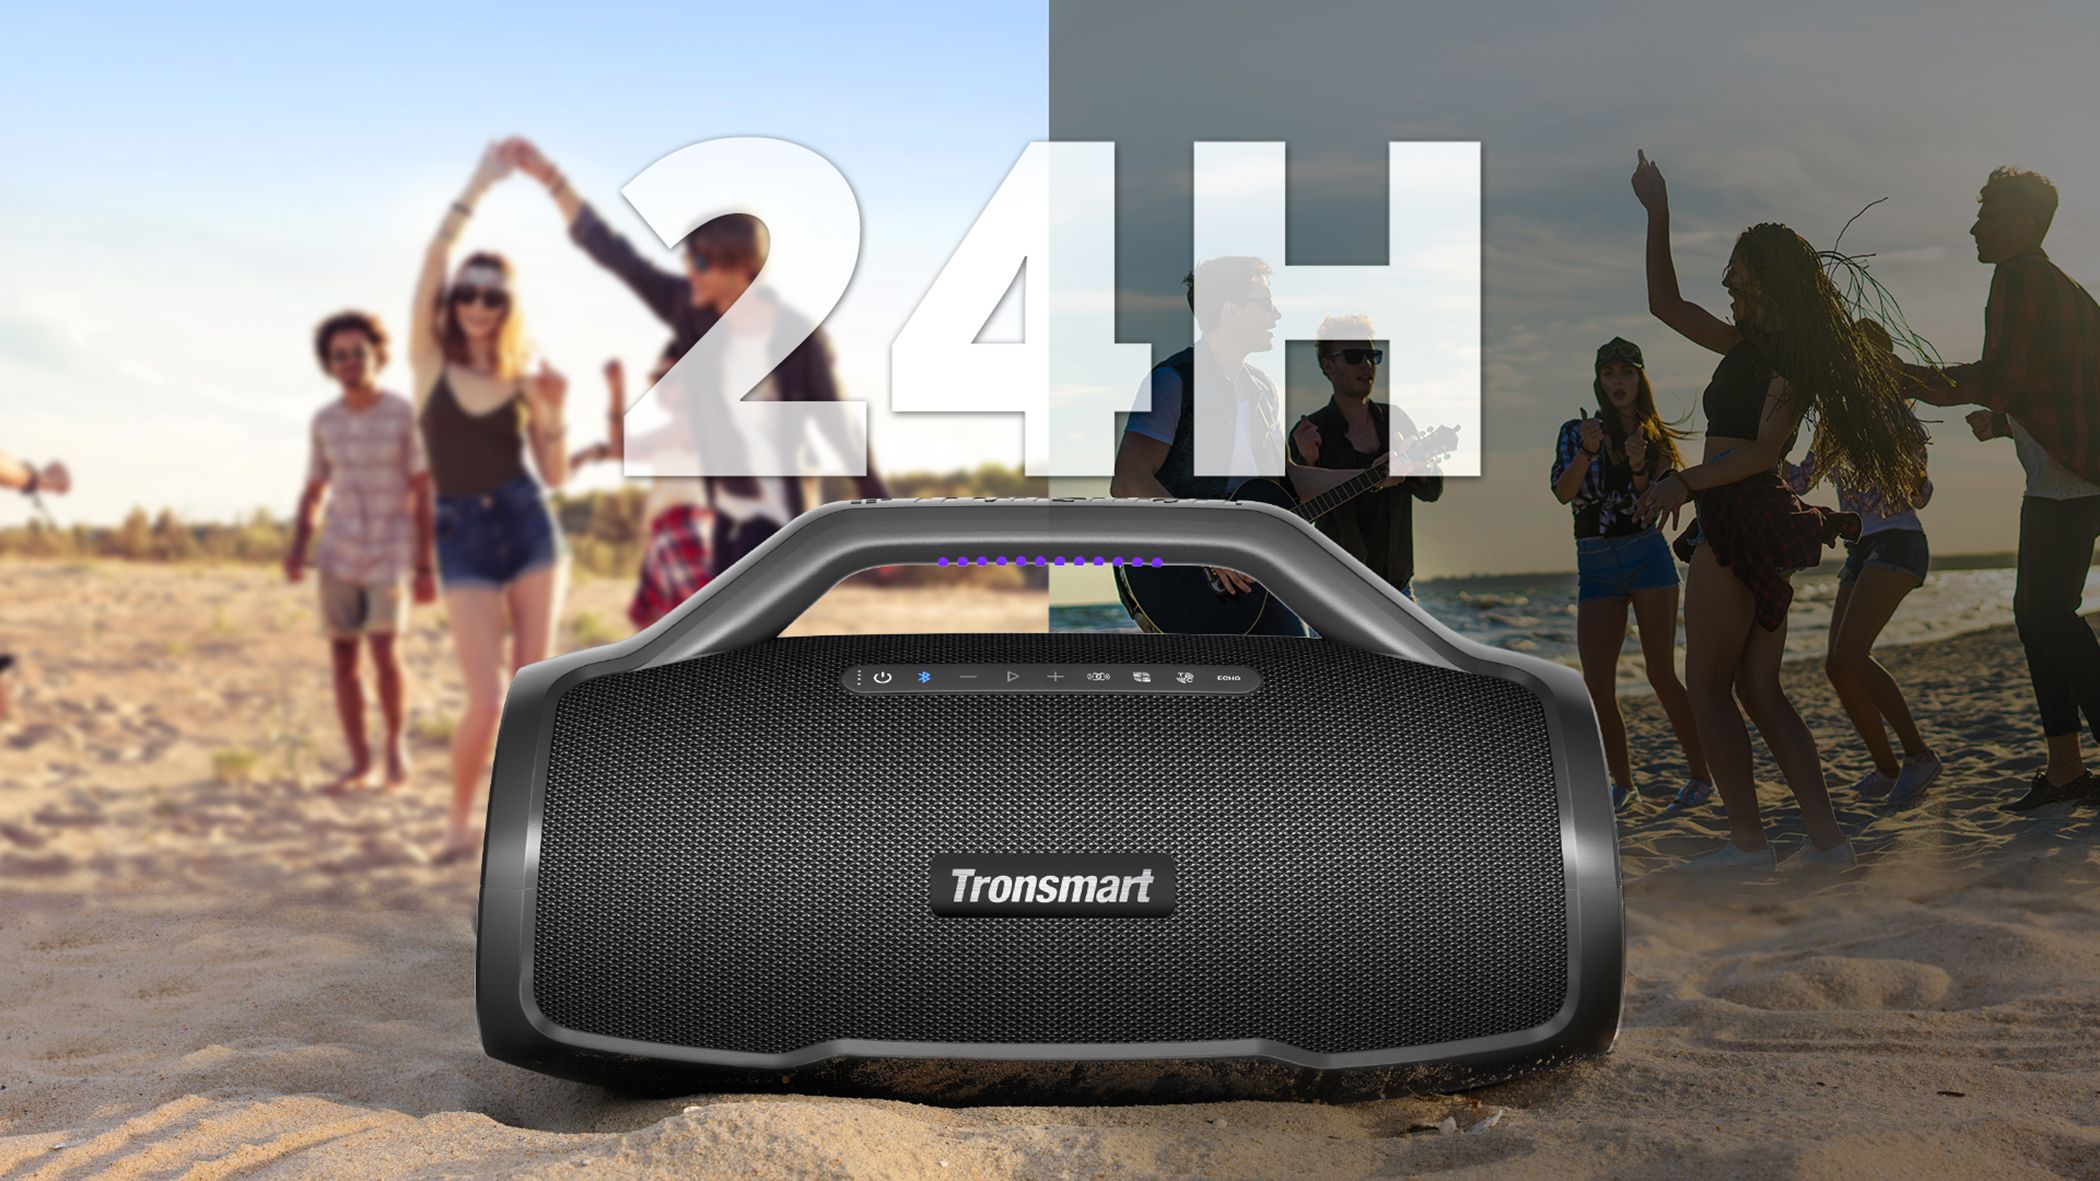 People partying at the beach with speakers